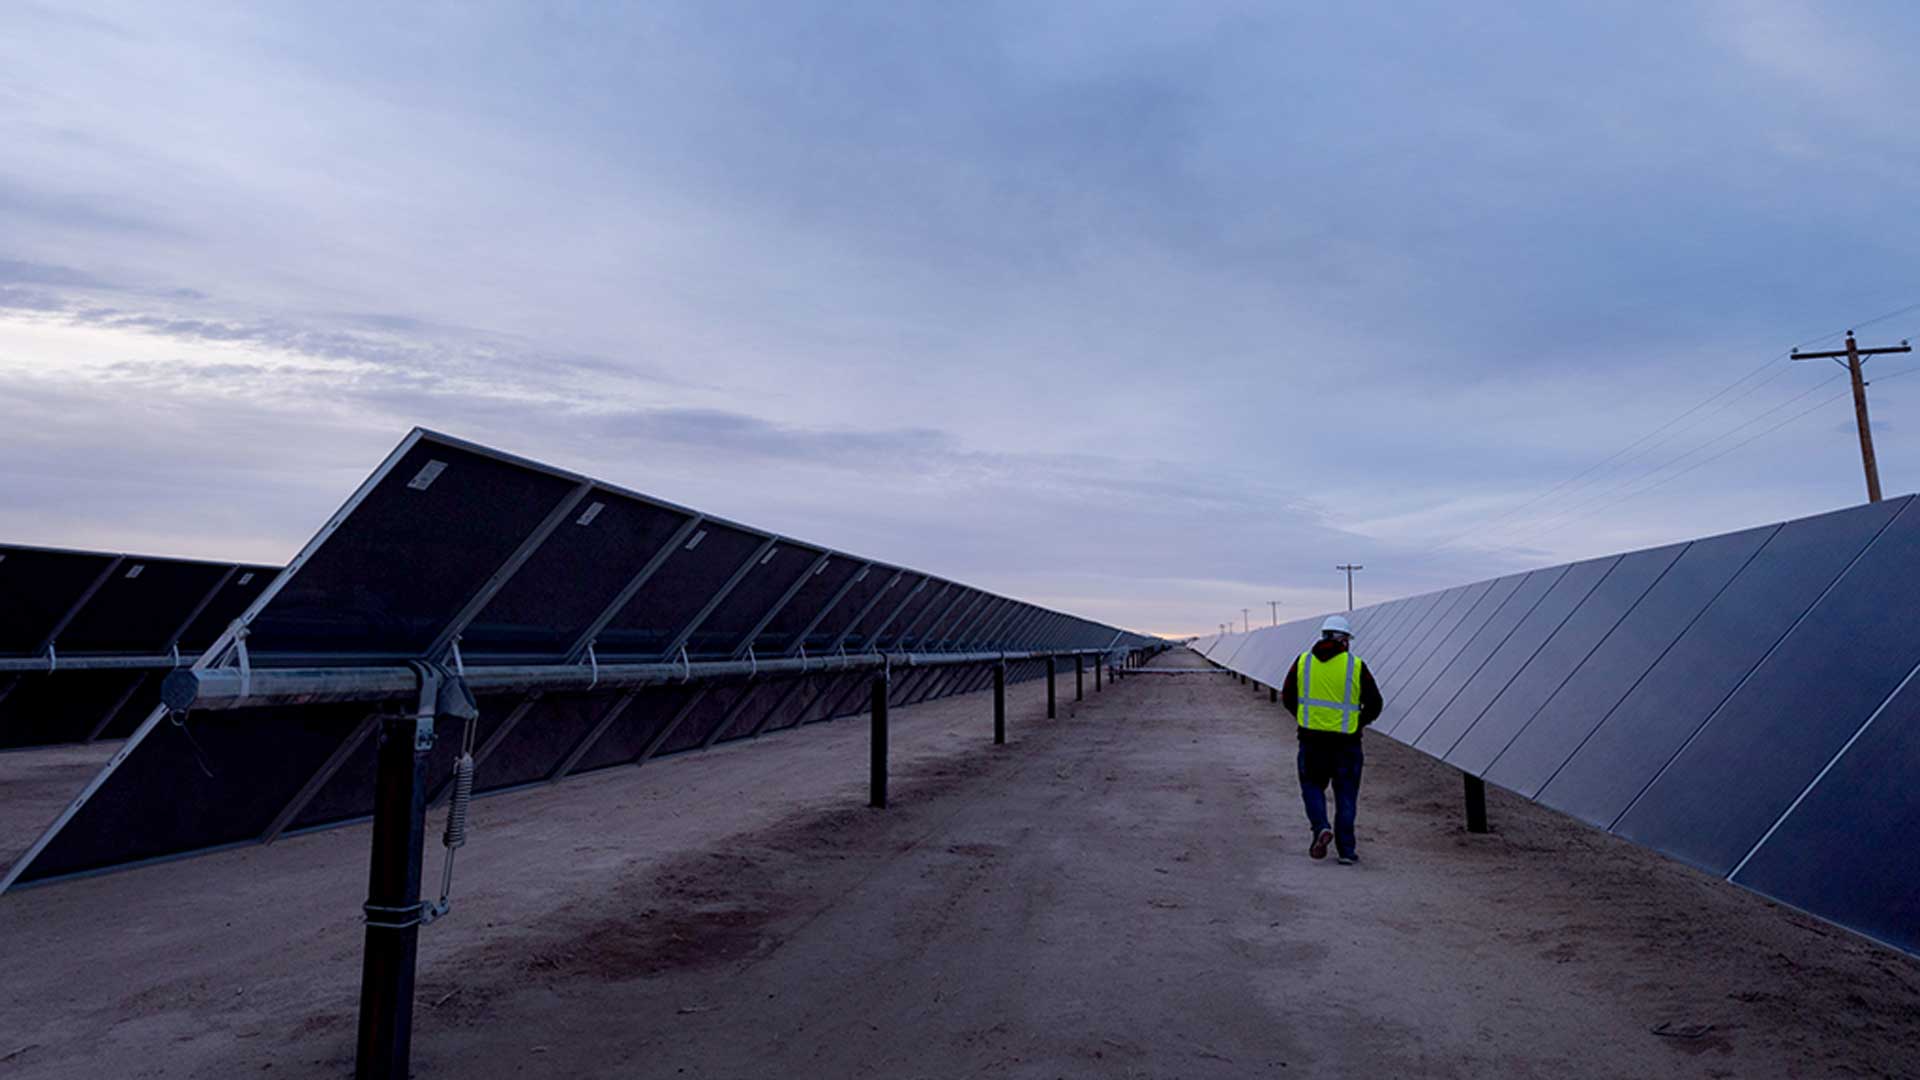 SRP and Clenera will begin construction on Arizona’s largest solar plant in 2023 northwest of Flagstaff. SRP has been working to expand solar, including at East Line Solar in Coolidge, shown here, which was initiated by SRP and is owned and operated by a subsidiary of AES. 